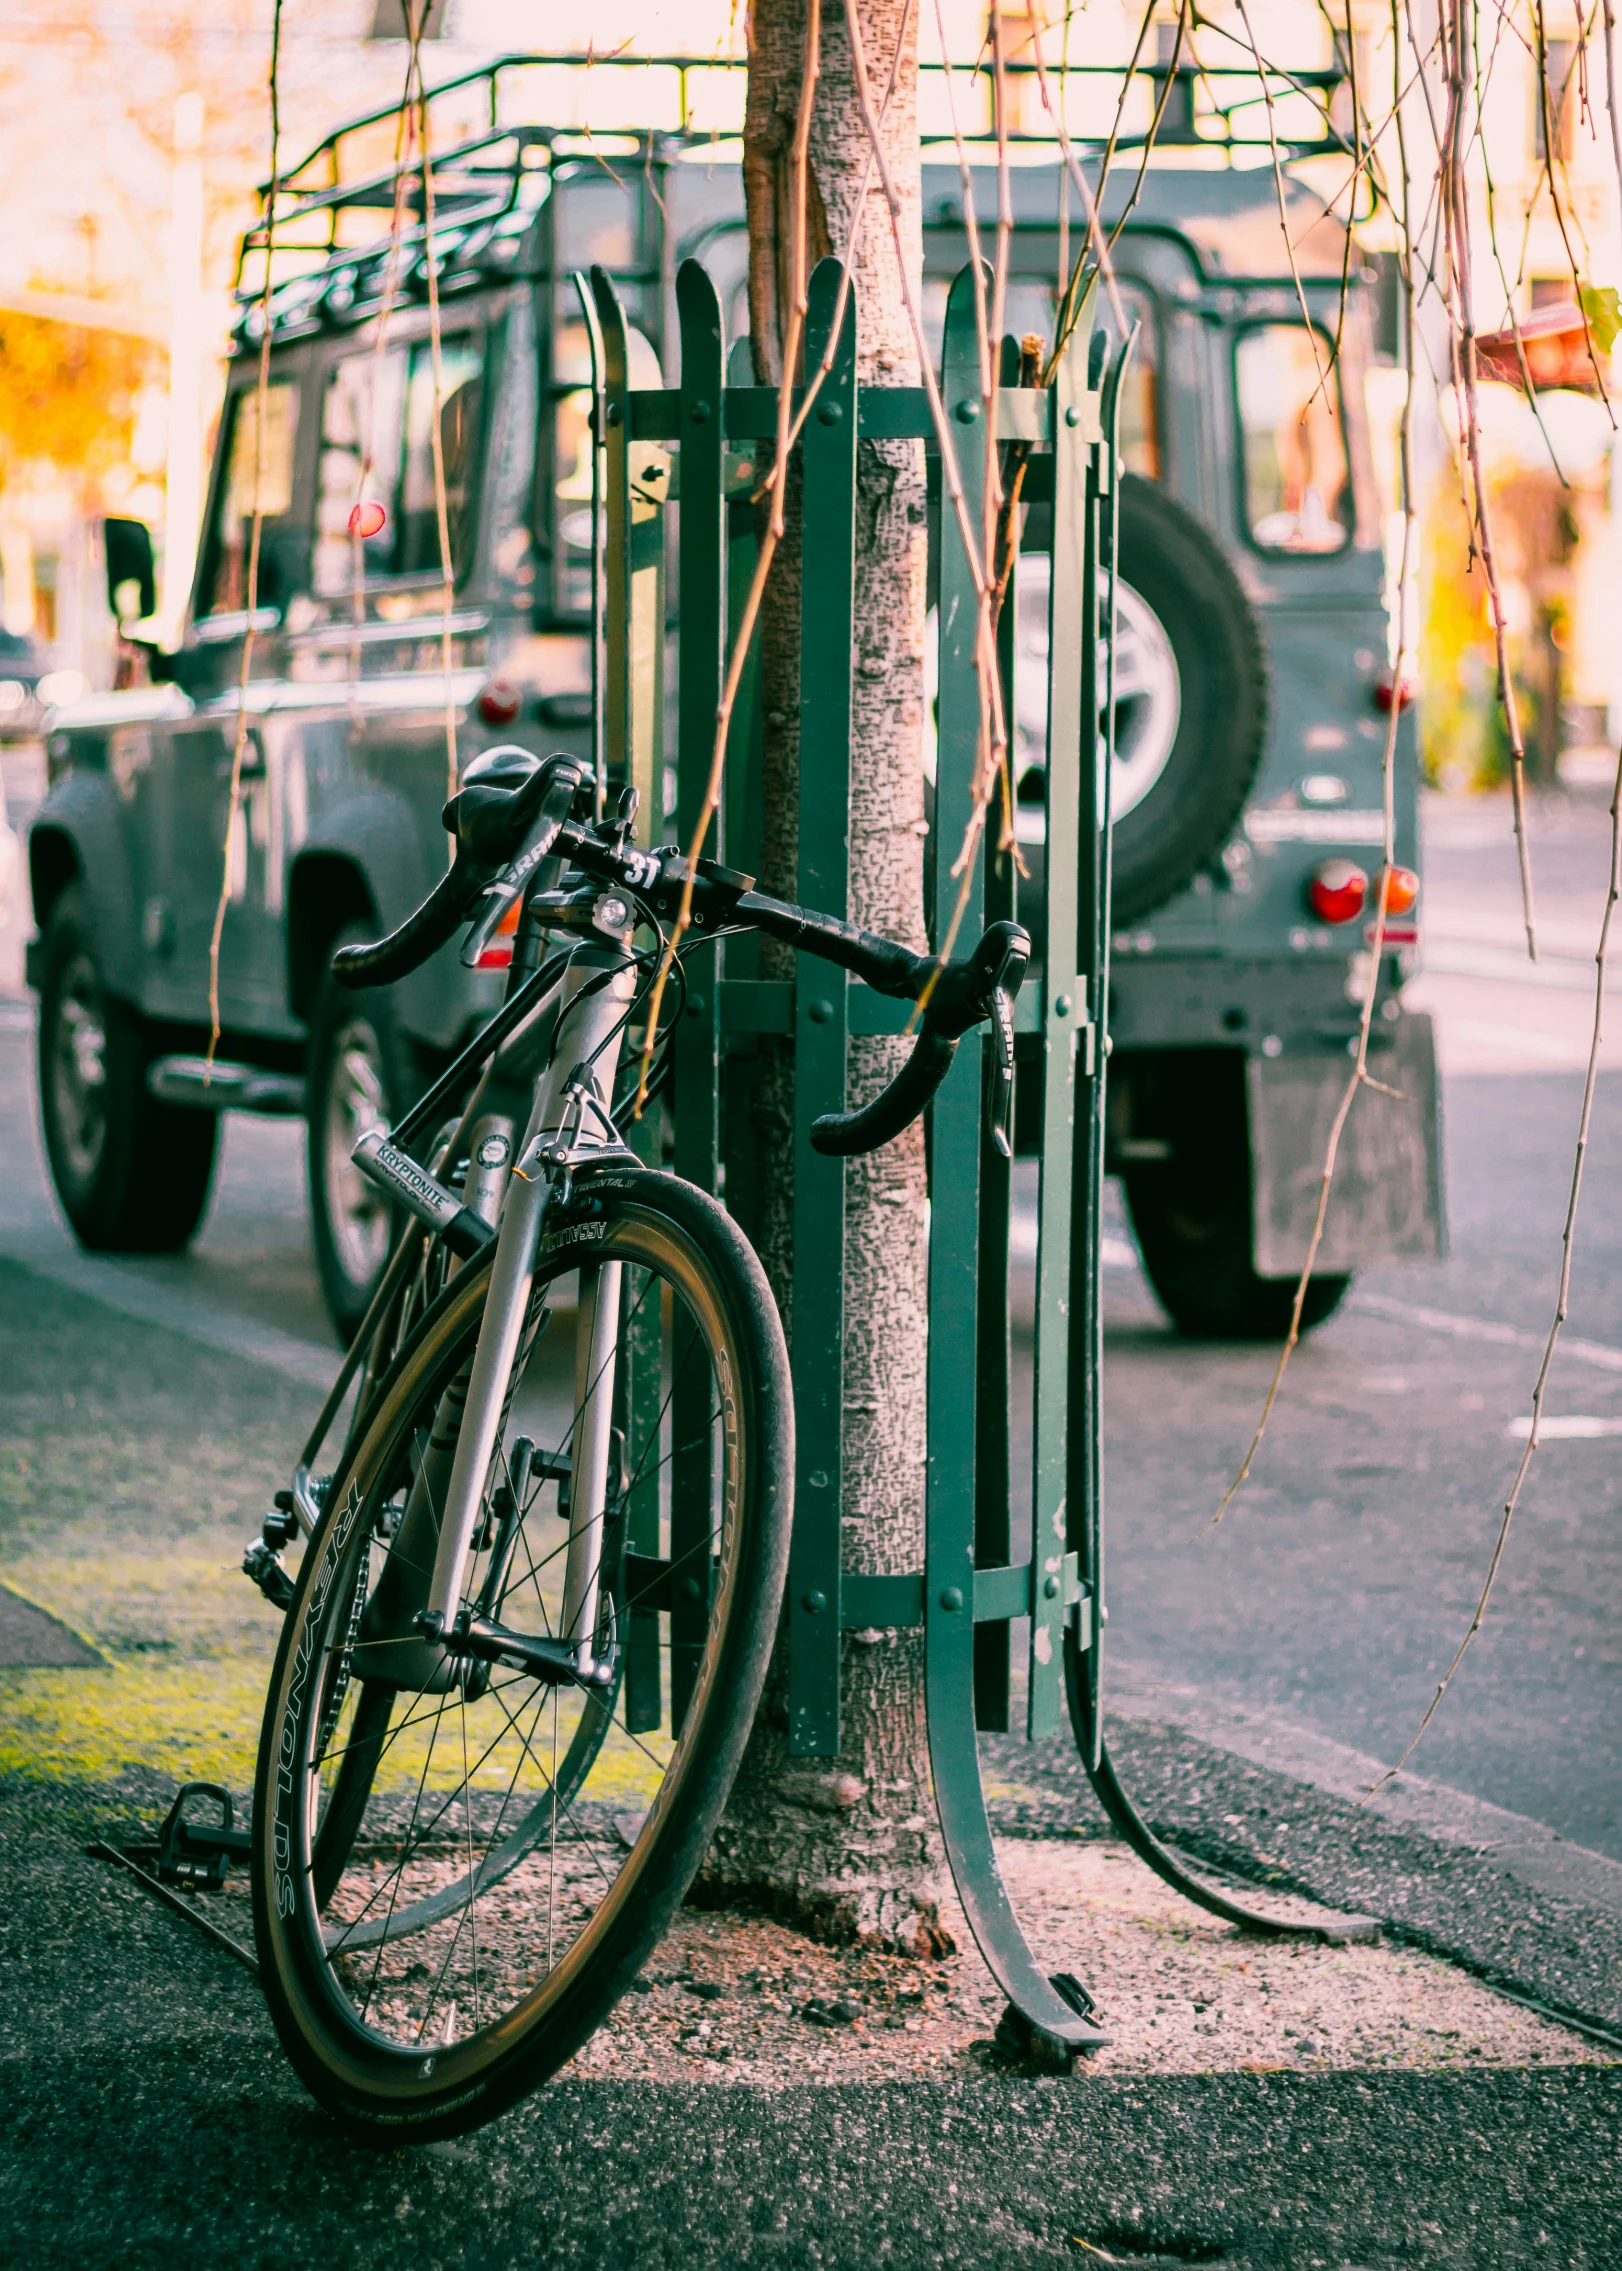 a bicycle tied to a pole with a parking meter